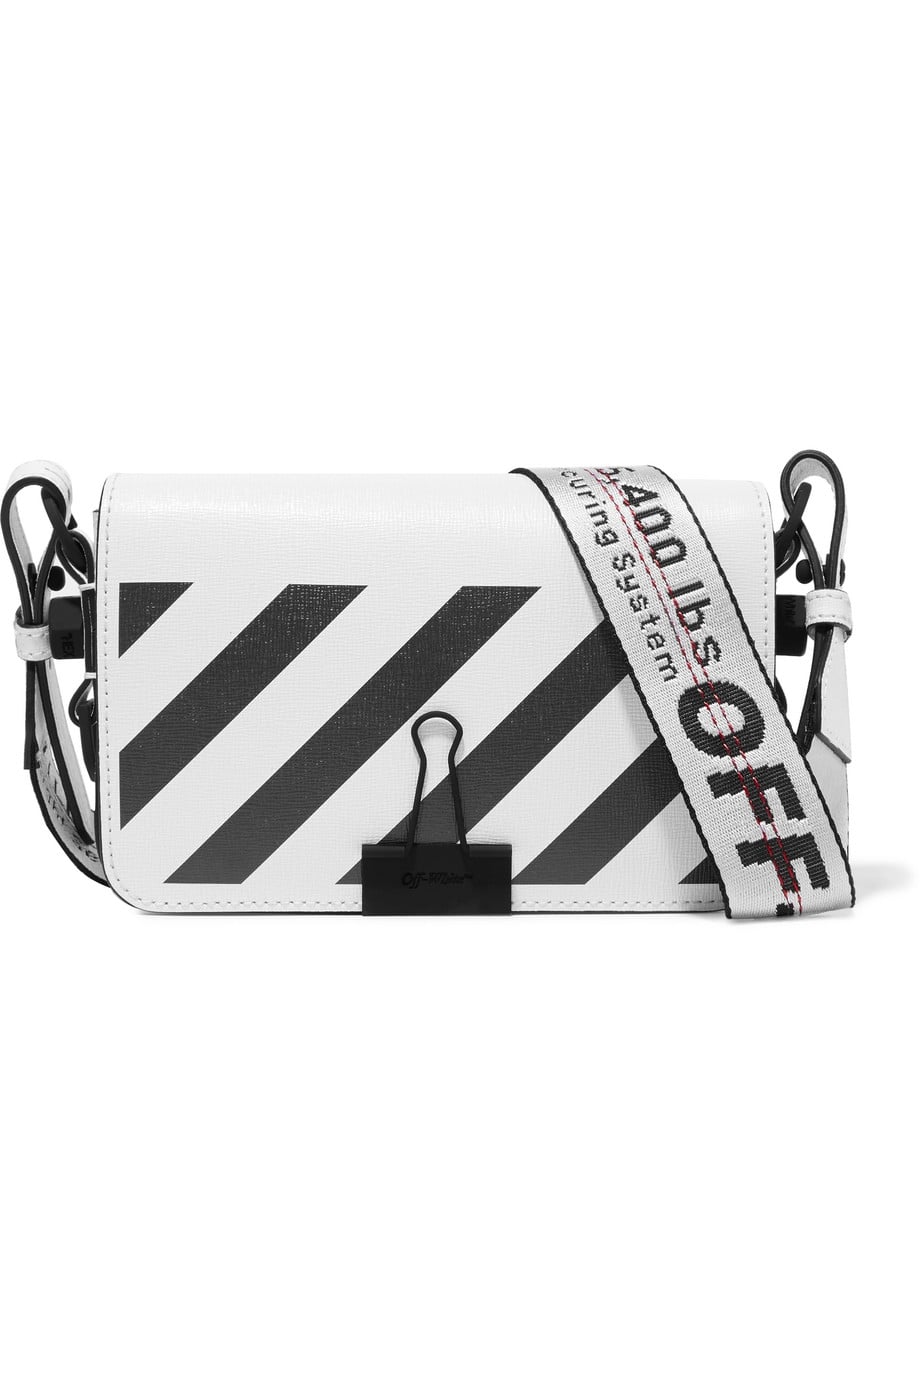 Off-White Mini Striped Textured-Leather Shoulder Bag, Aren't You Lucky:  Spring's 6 Biggest Bag Trends Appeal to Every Type of Girl